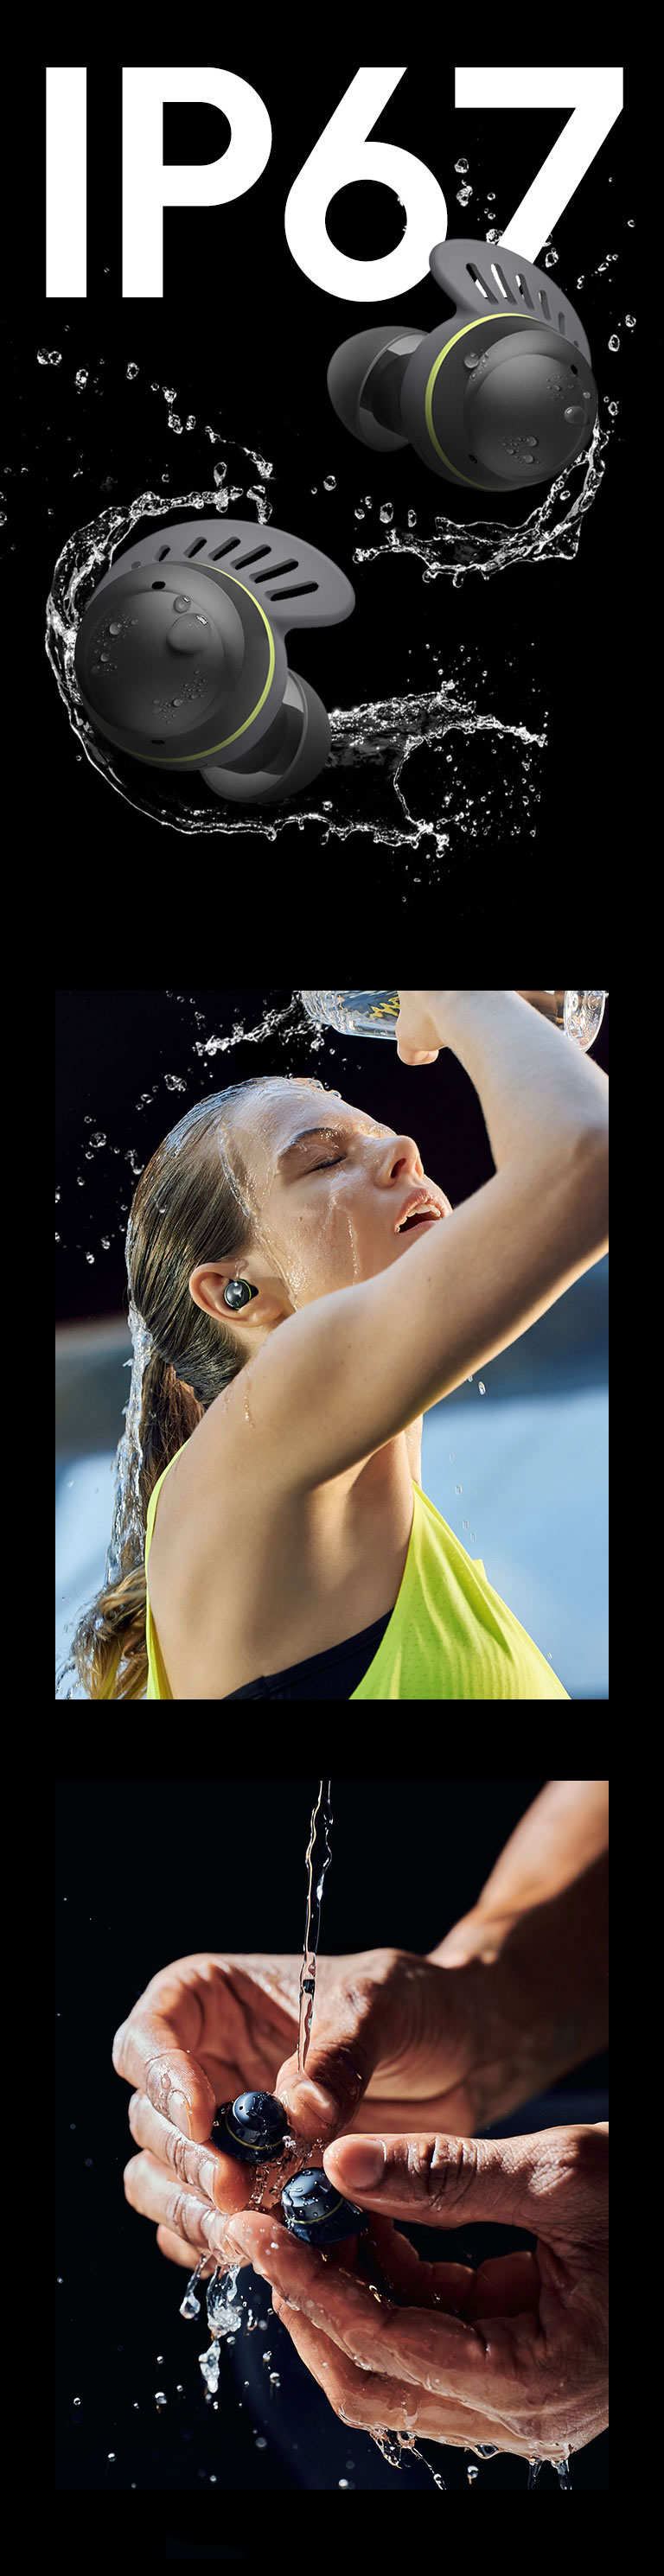 TONE Free fit earbuds in front of text saying IP67. The earbuds are surrounded by water and water droplets. A woman with her hair tied up is shown on the left, wearing a TONE Free fit product, pouring water on her face, and a man's hand washing the TONE Free fit earbuds with water is shown on the right.